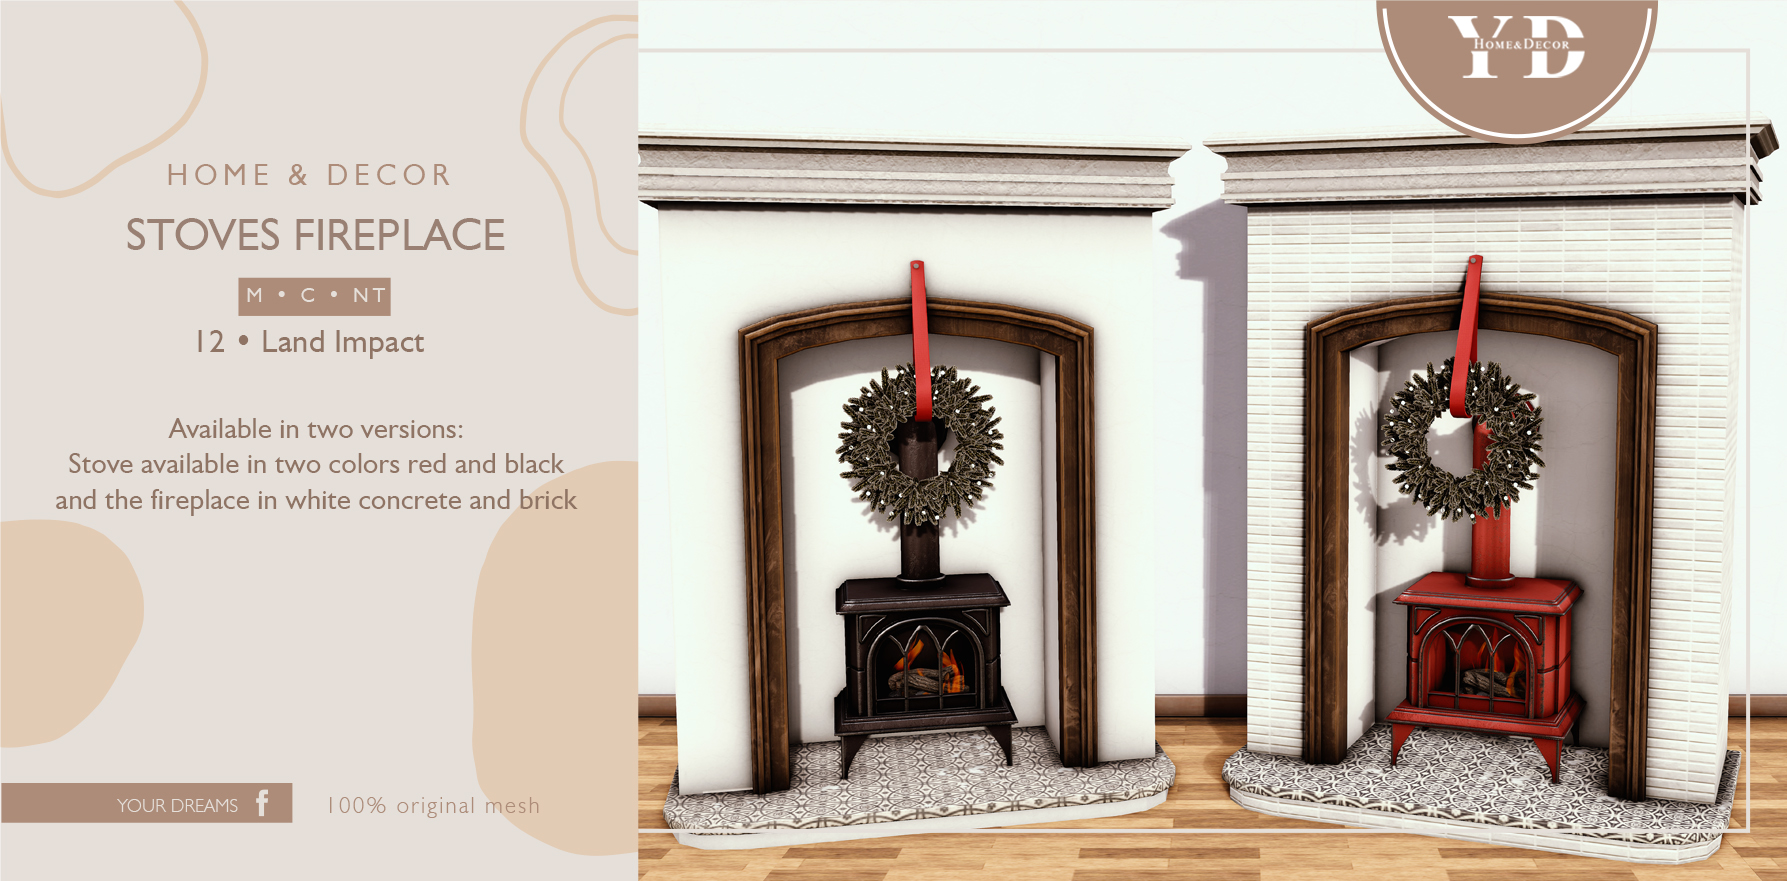 Your Dreams – Stoves Fireplace